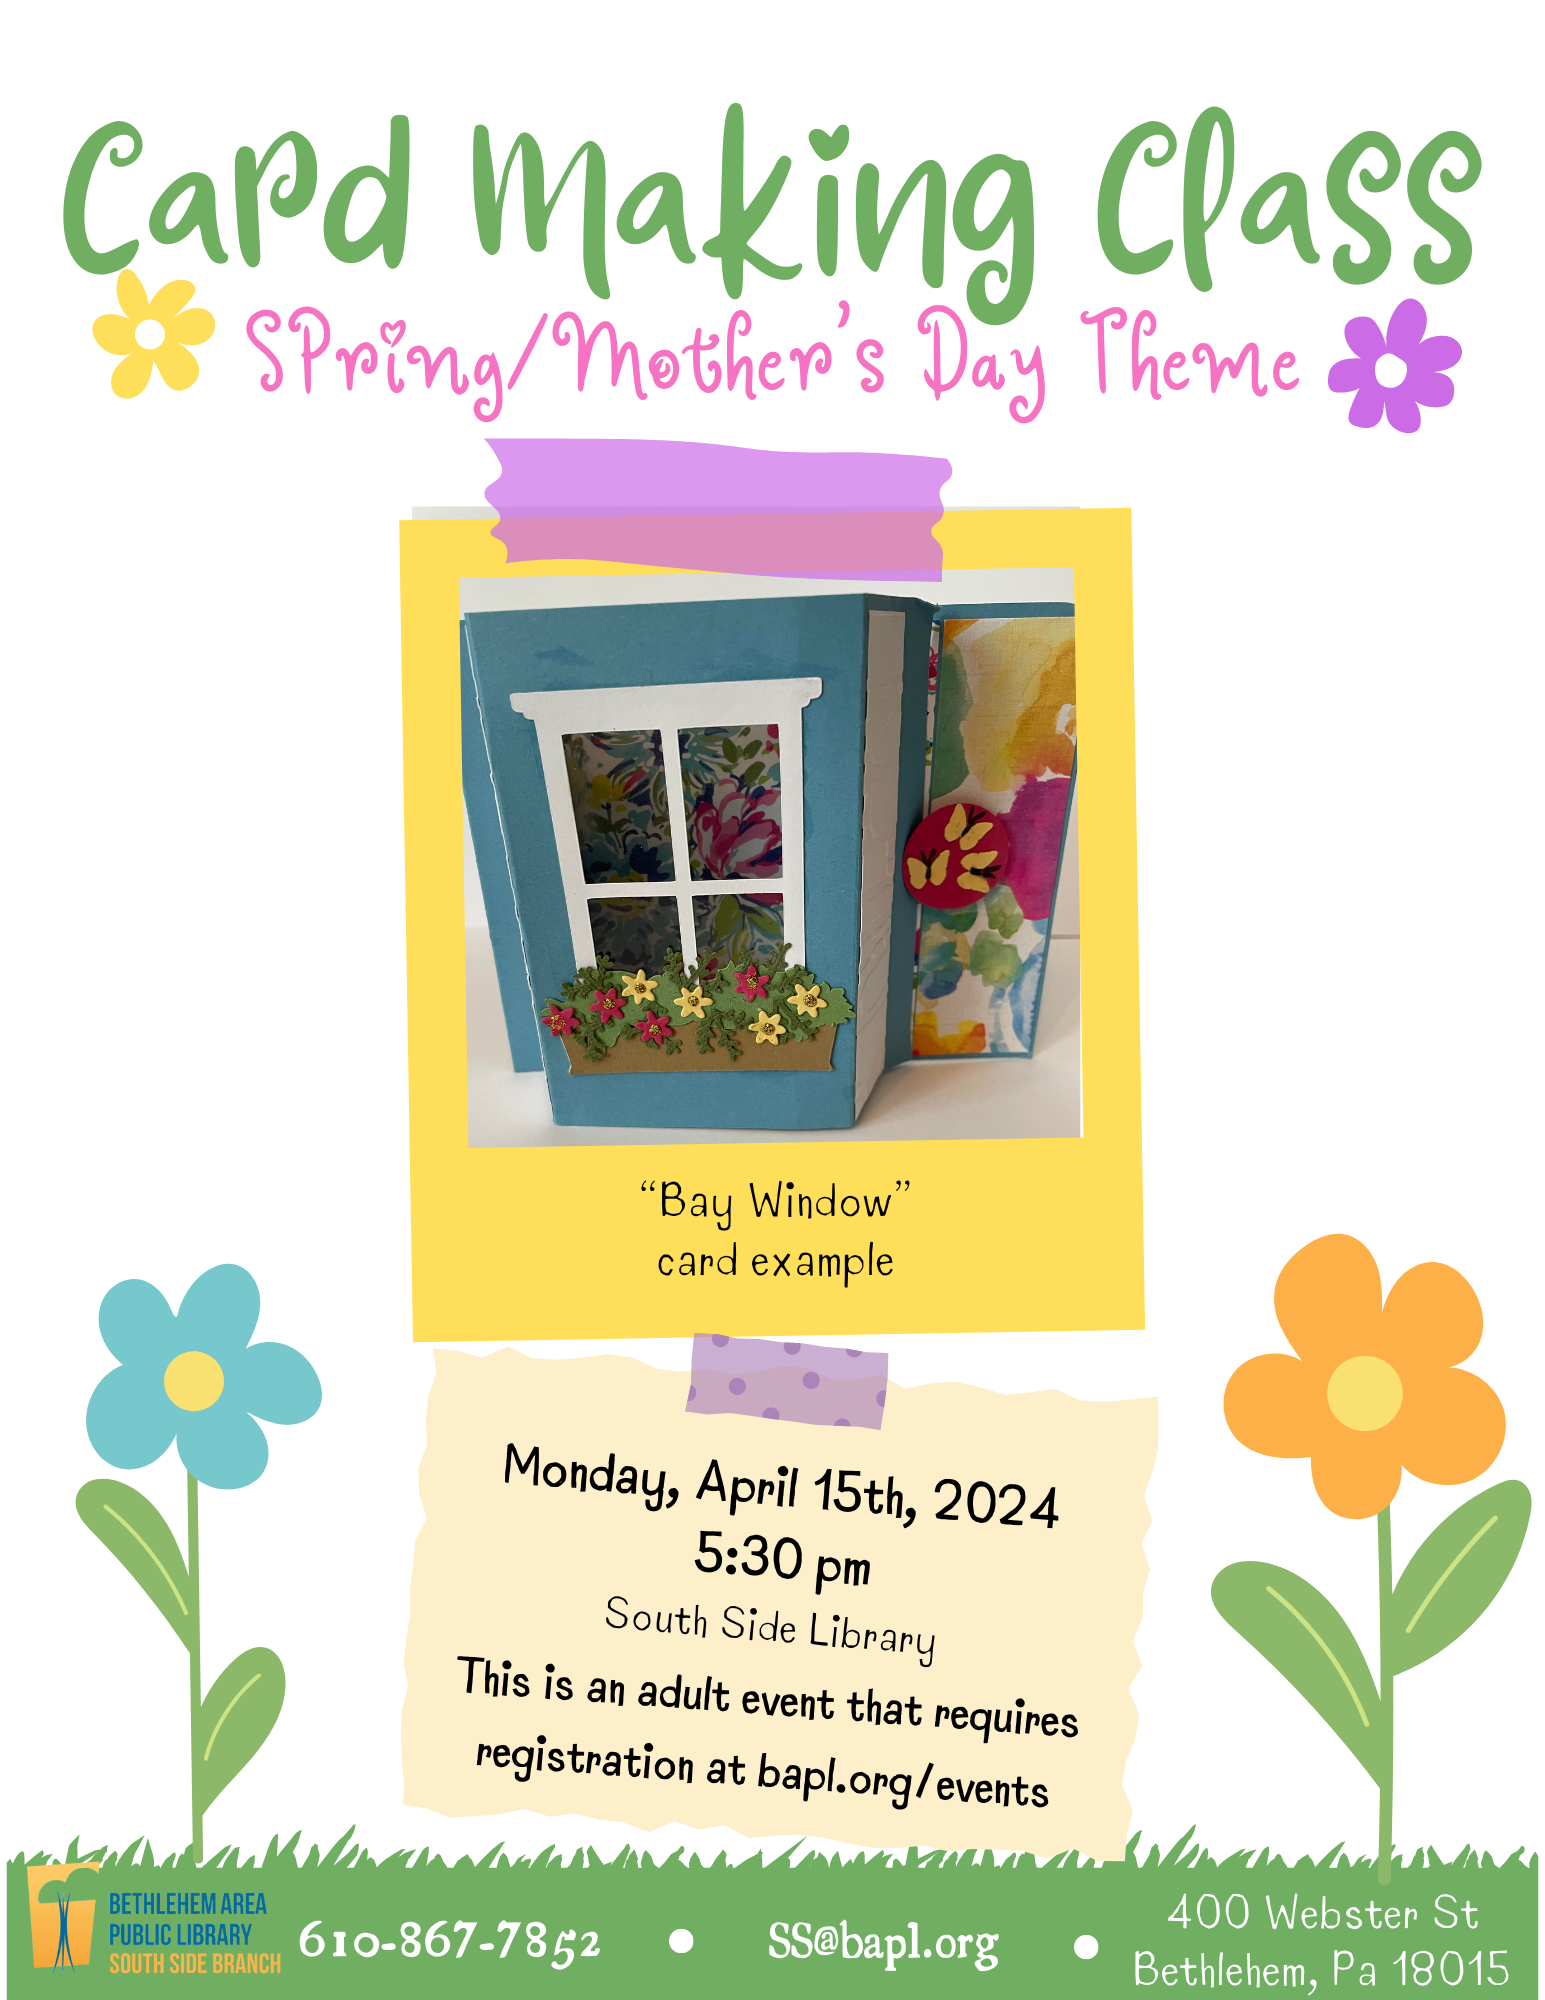 Card Making Class, Spring/ Mother's Day Theme, picture of a "bay window" card example, Monday April 15th 5:30-6:30 pm South Side Library, This is an adult event that requires  registration at bapl.org/events